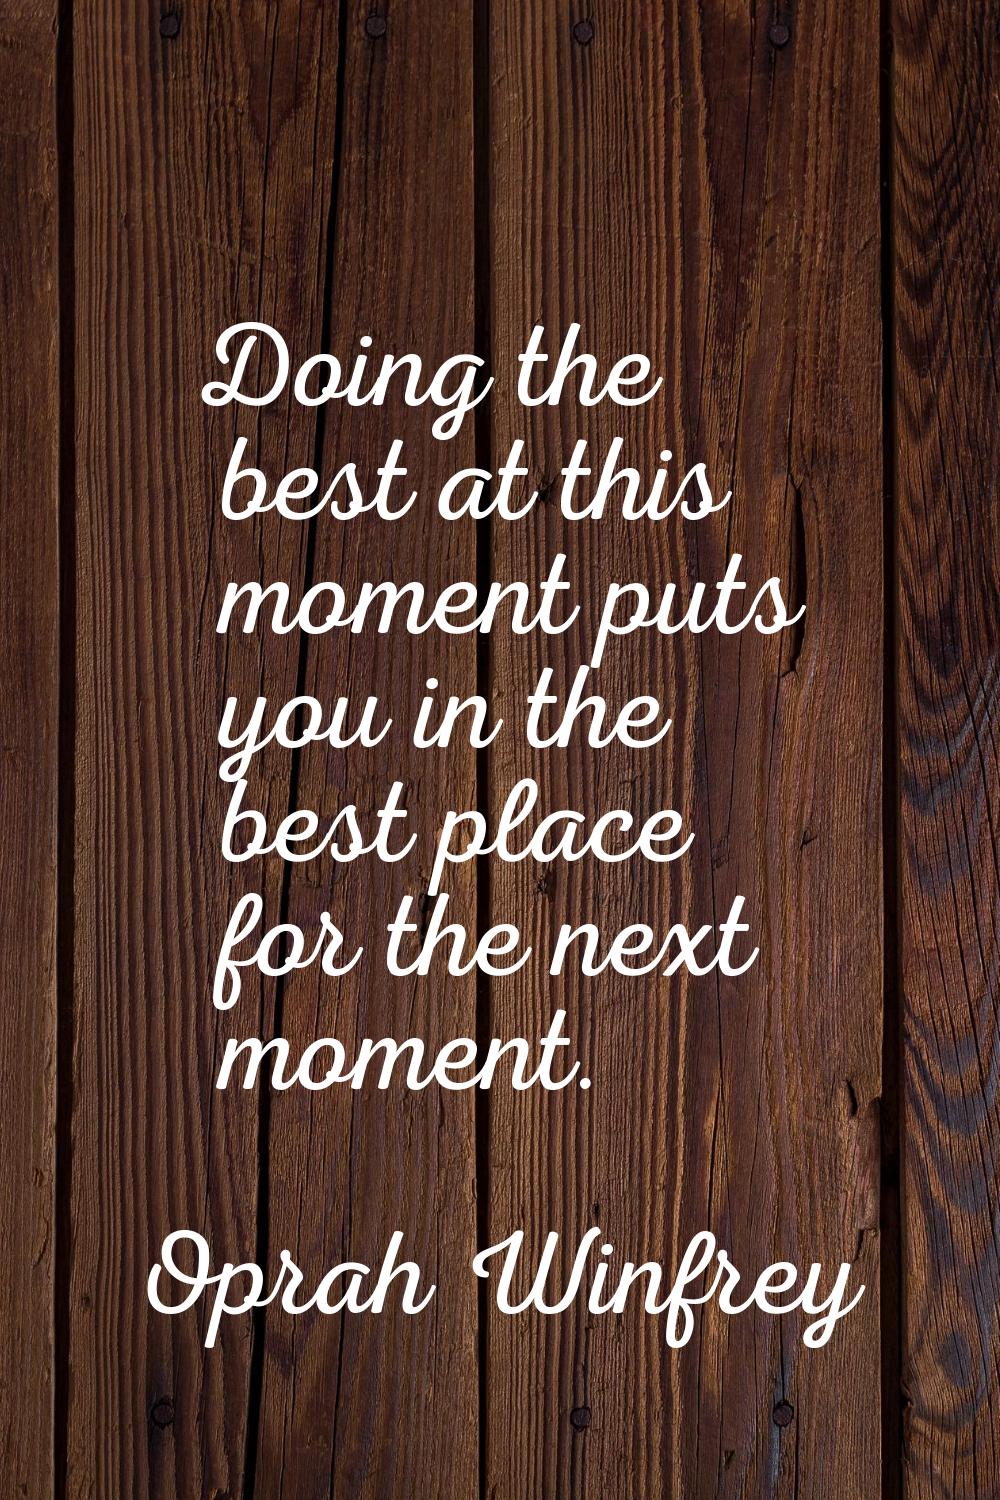 Doing the best at this moment puts you in the best place for the next moment.